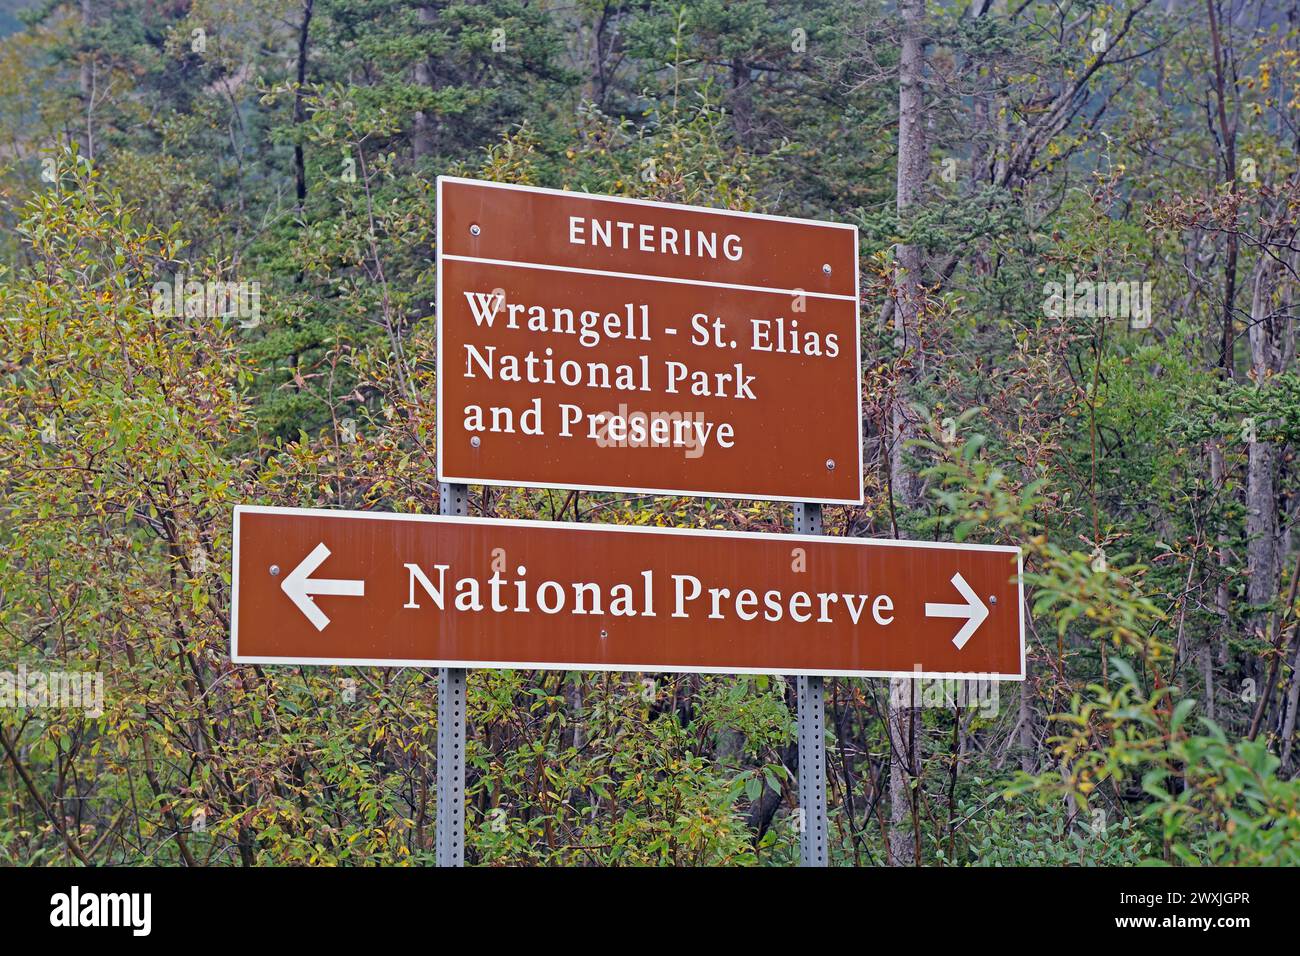 Signpost in the forest, Wrangell-St. Elias National Park, Alaska, USA Stock Photo